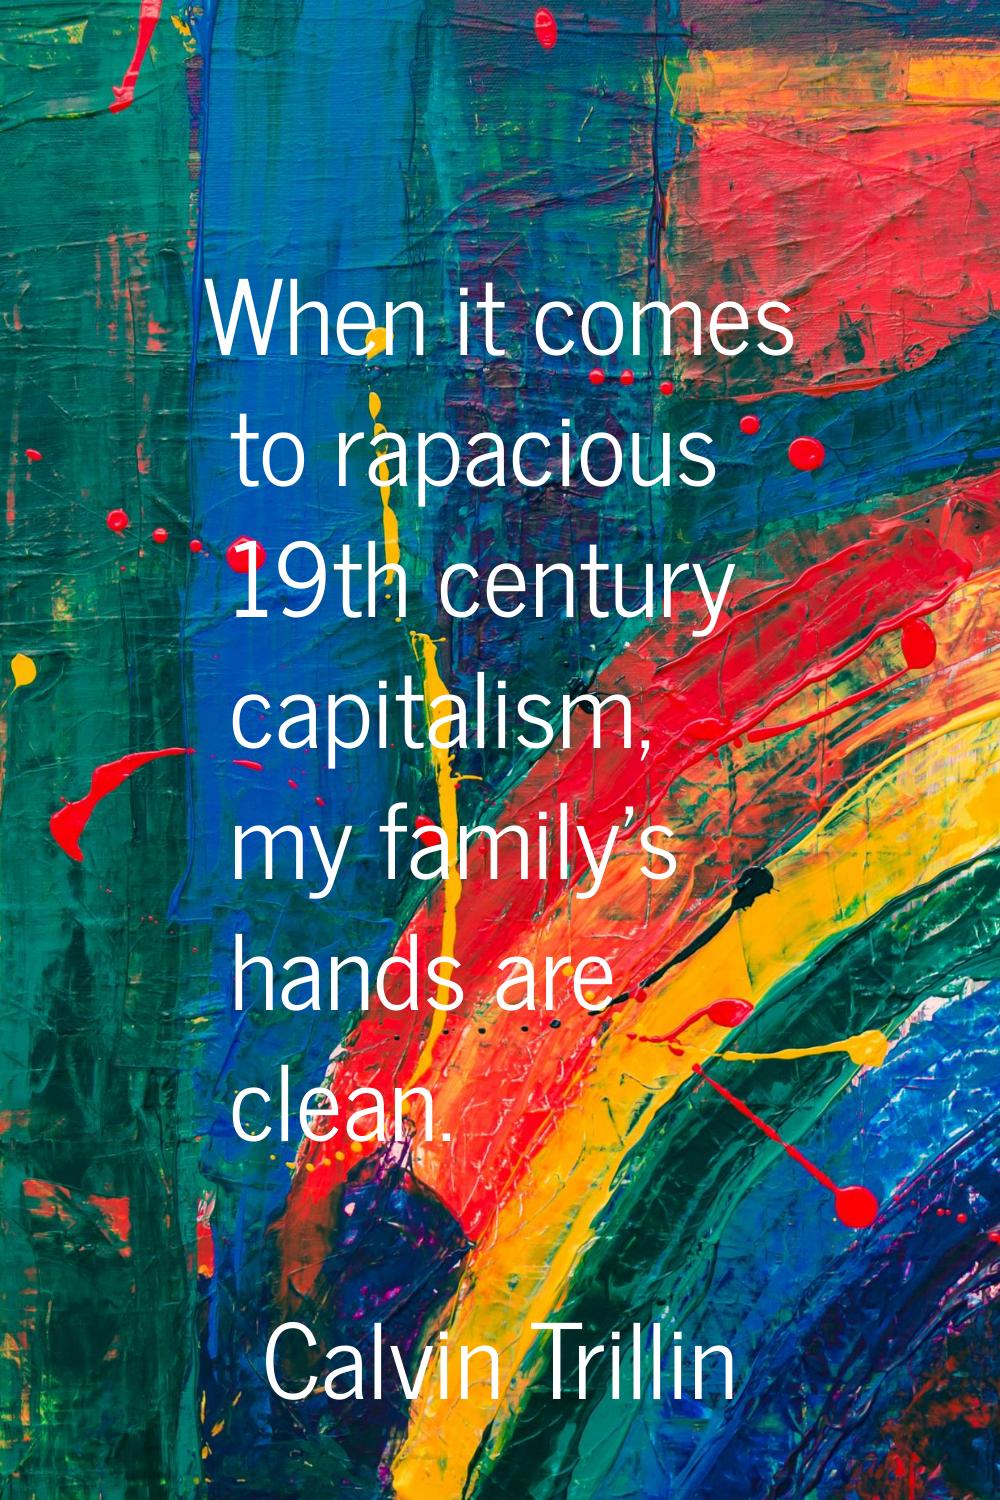 When it comes to rapacious 19th century capitalism, my family's hands are clean.